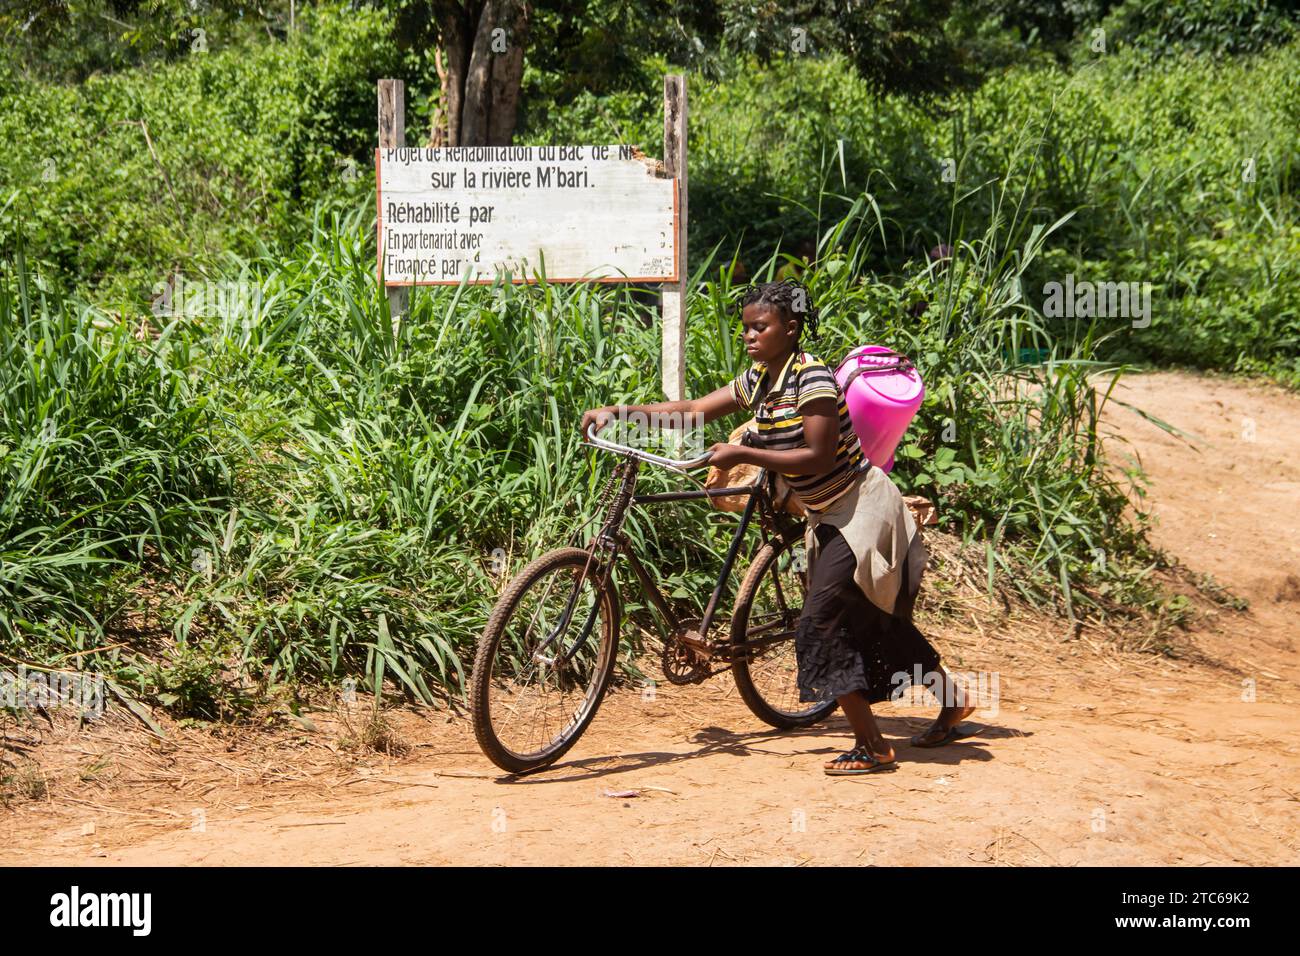 People of Africa in remote place on dirty road, caring goods on motorbikes after crossing the river, bicycles and their heads, life street photography Stock Photo